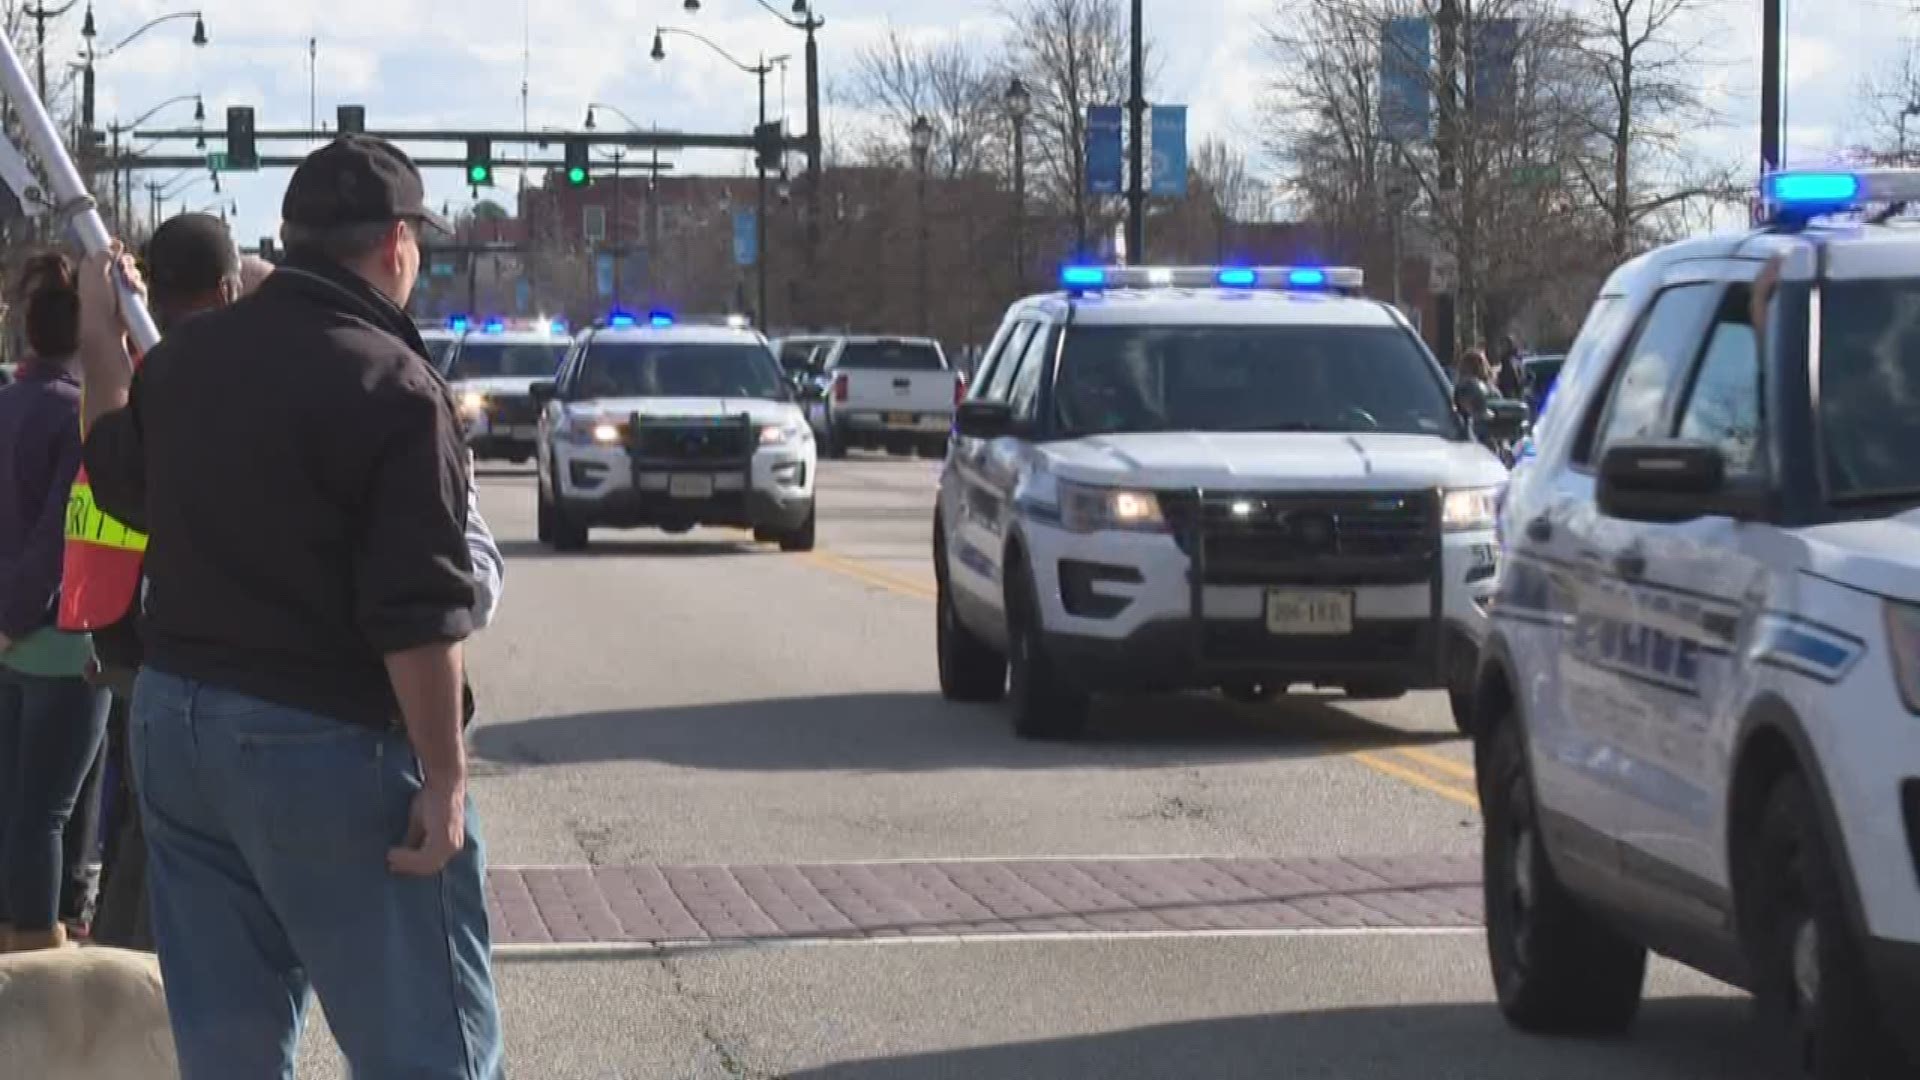 Law enforcement and community members waited along the procession's route to pay respects to Officer Katie Thyne, who was killed in the line of duty.